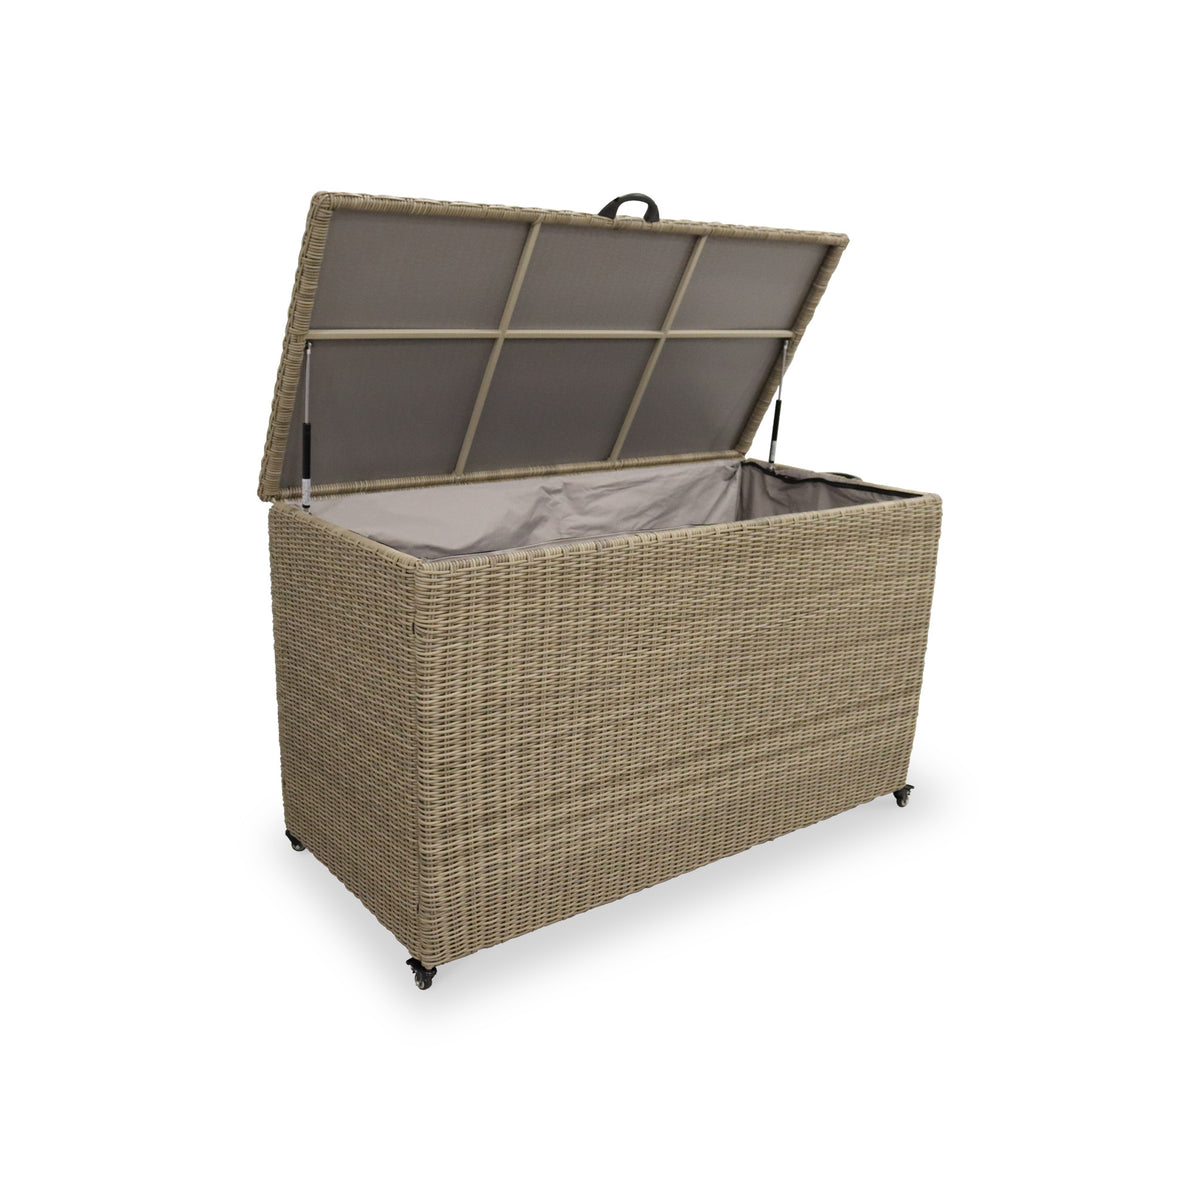 Wentworth 826L Rattan Garden Storage Box with Gas Lift from Roseland Furniture